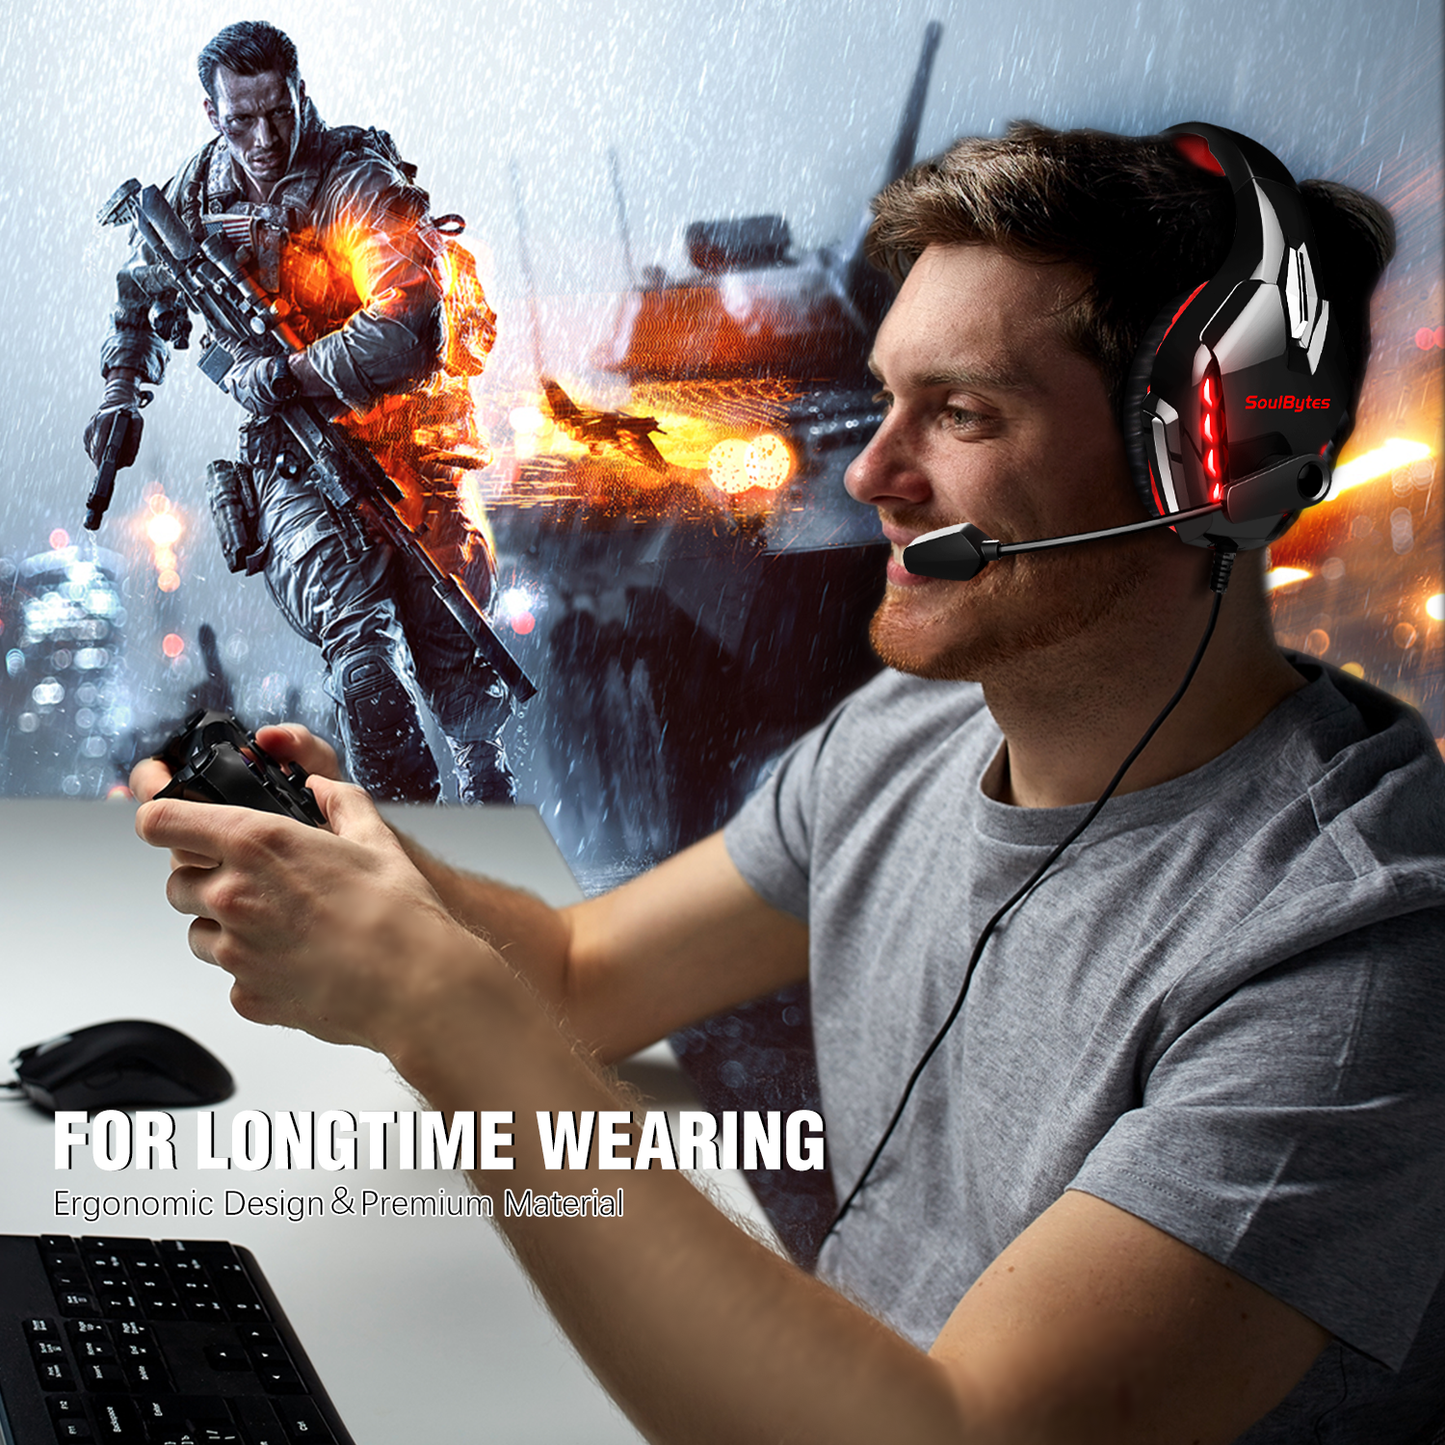 LED Light Display Wintory Soulbytes S11 Gaming Headset Wintory